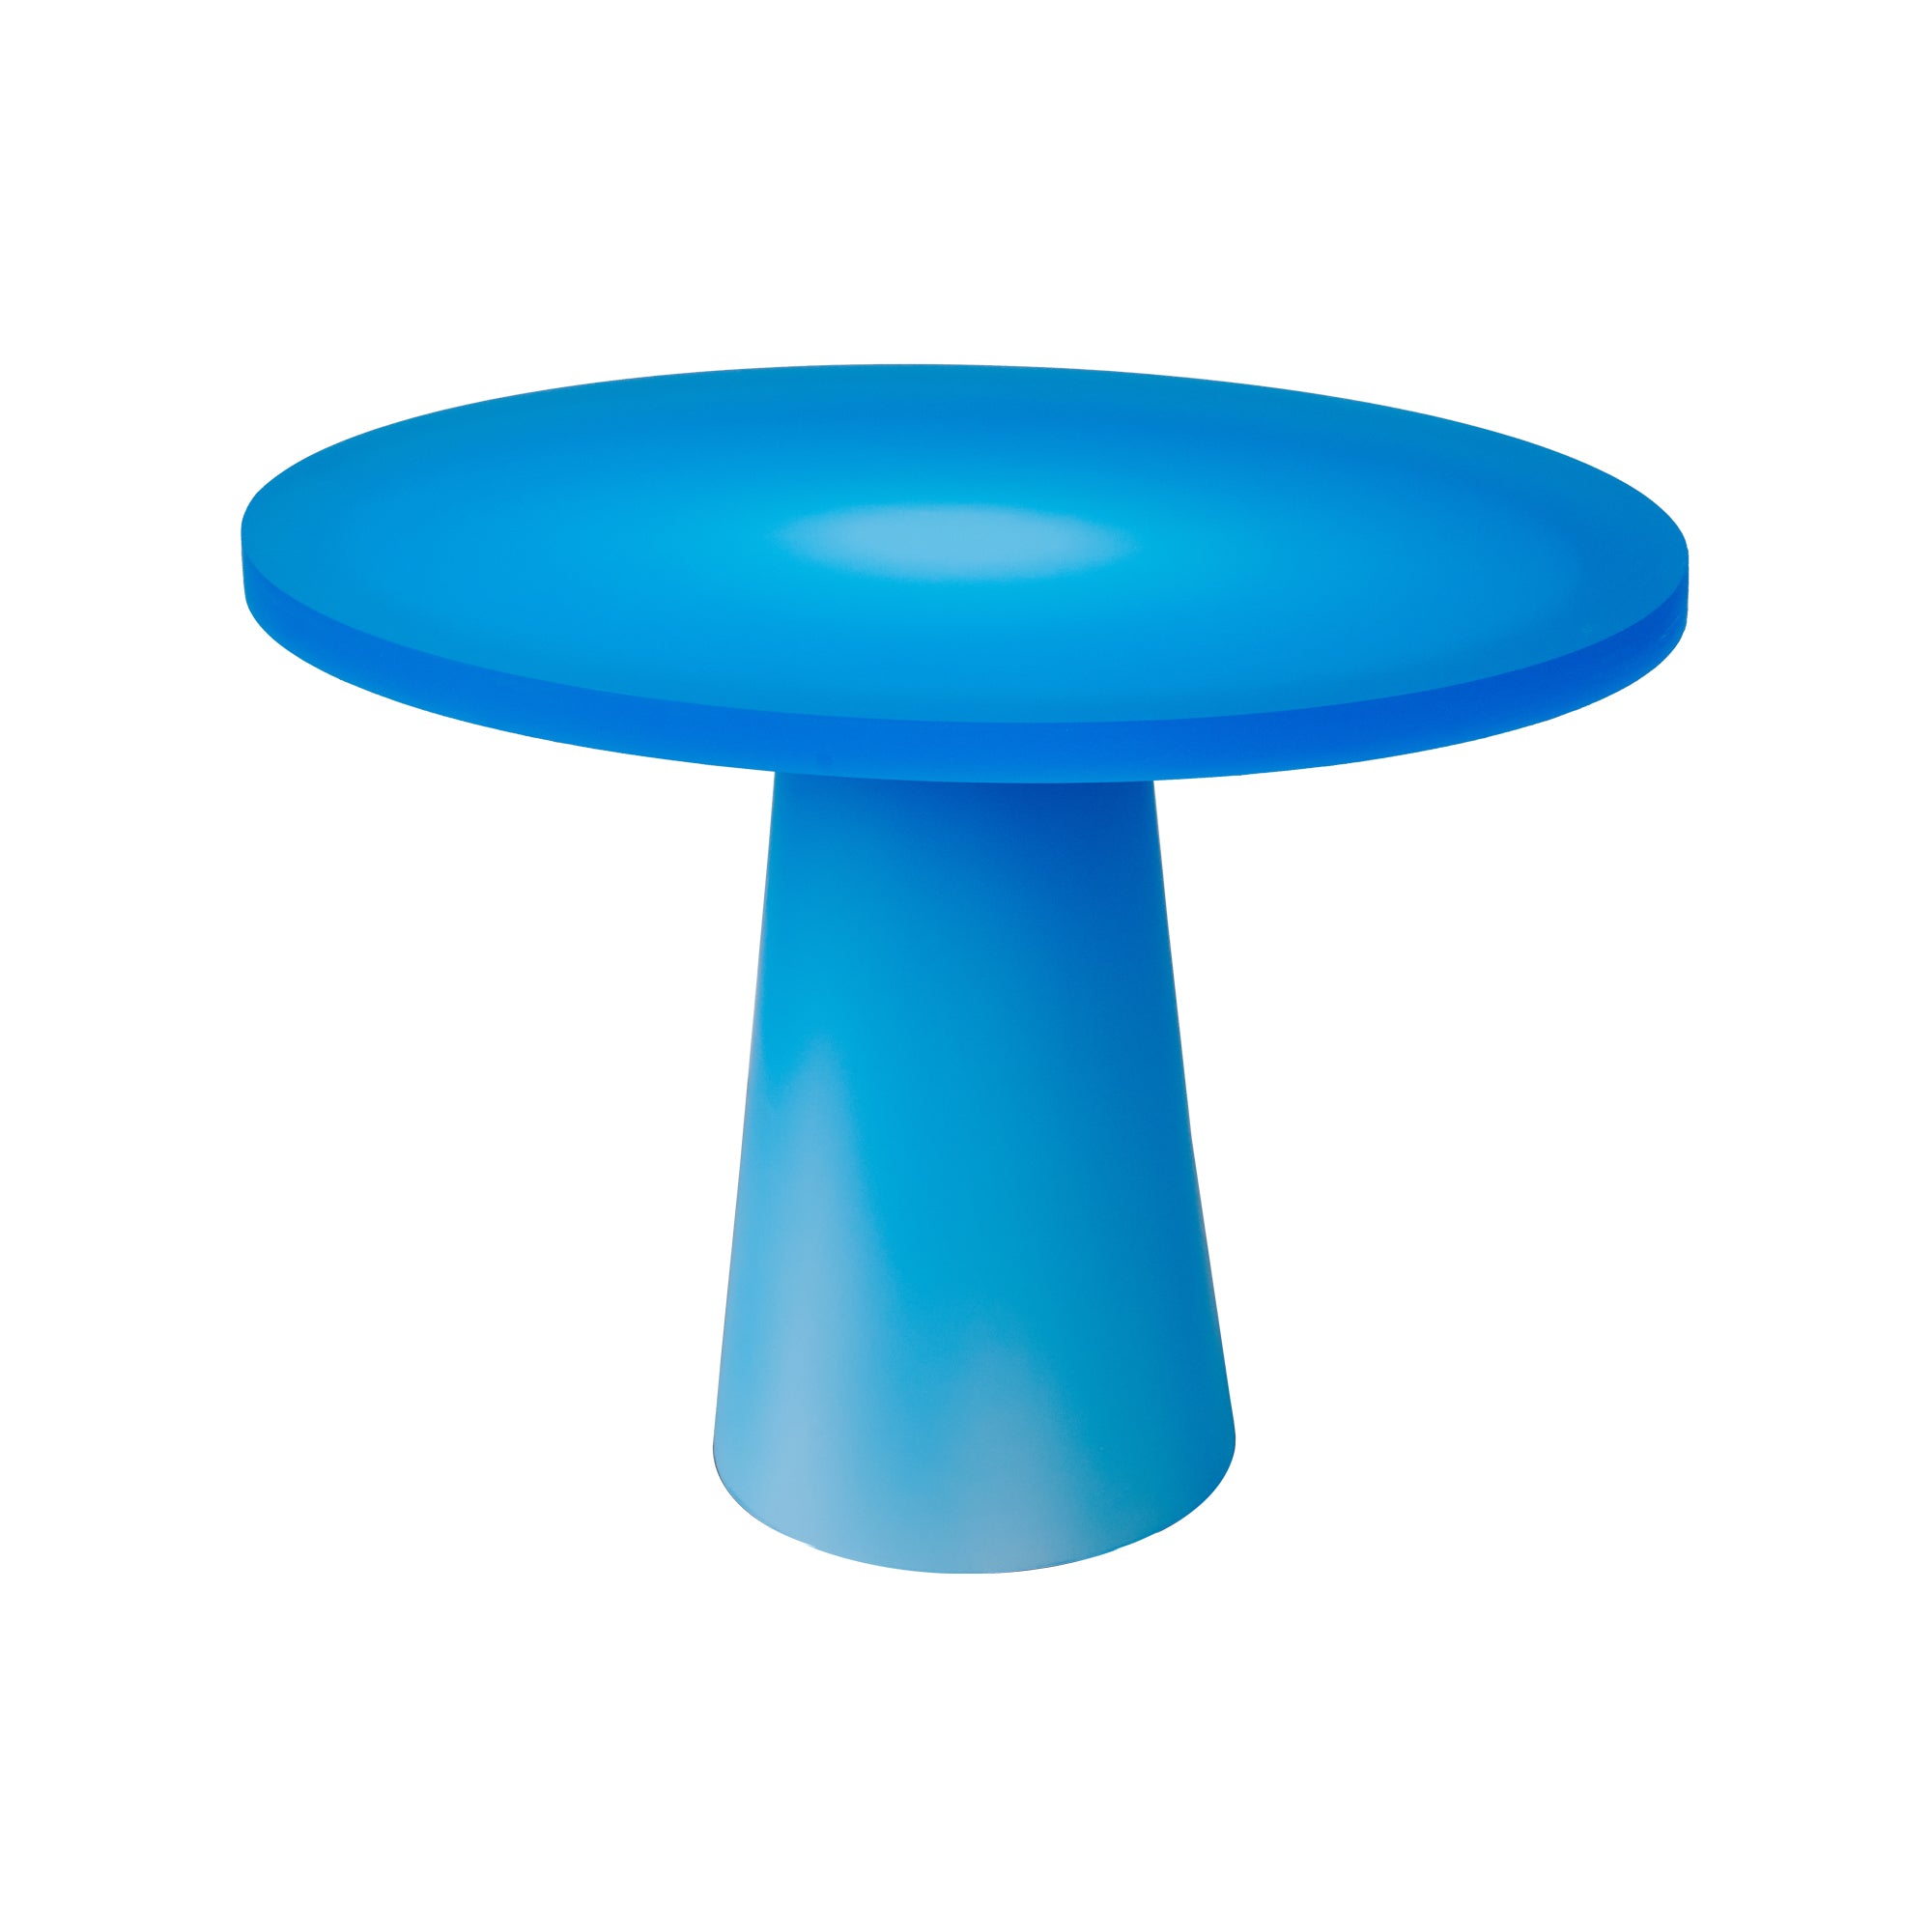 Elliptical Entry Table In Blue